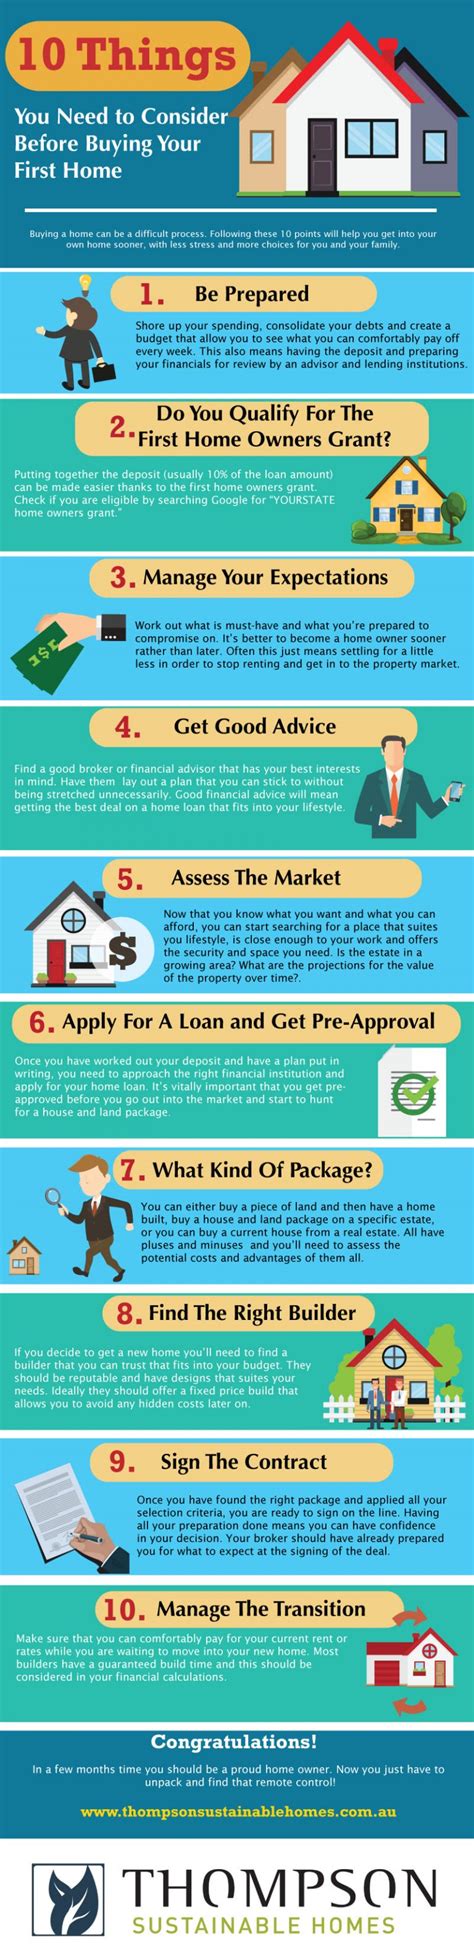 Infographic 10 Things You Need To Consider Before Buying Your First